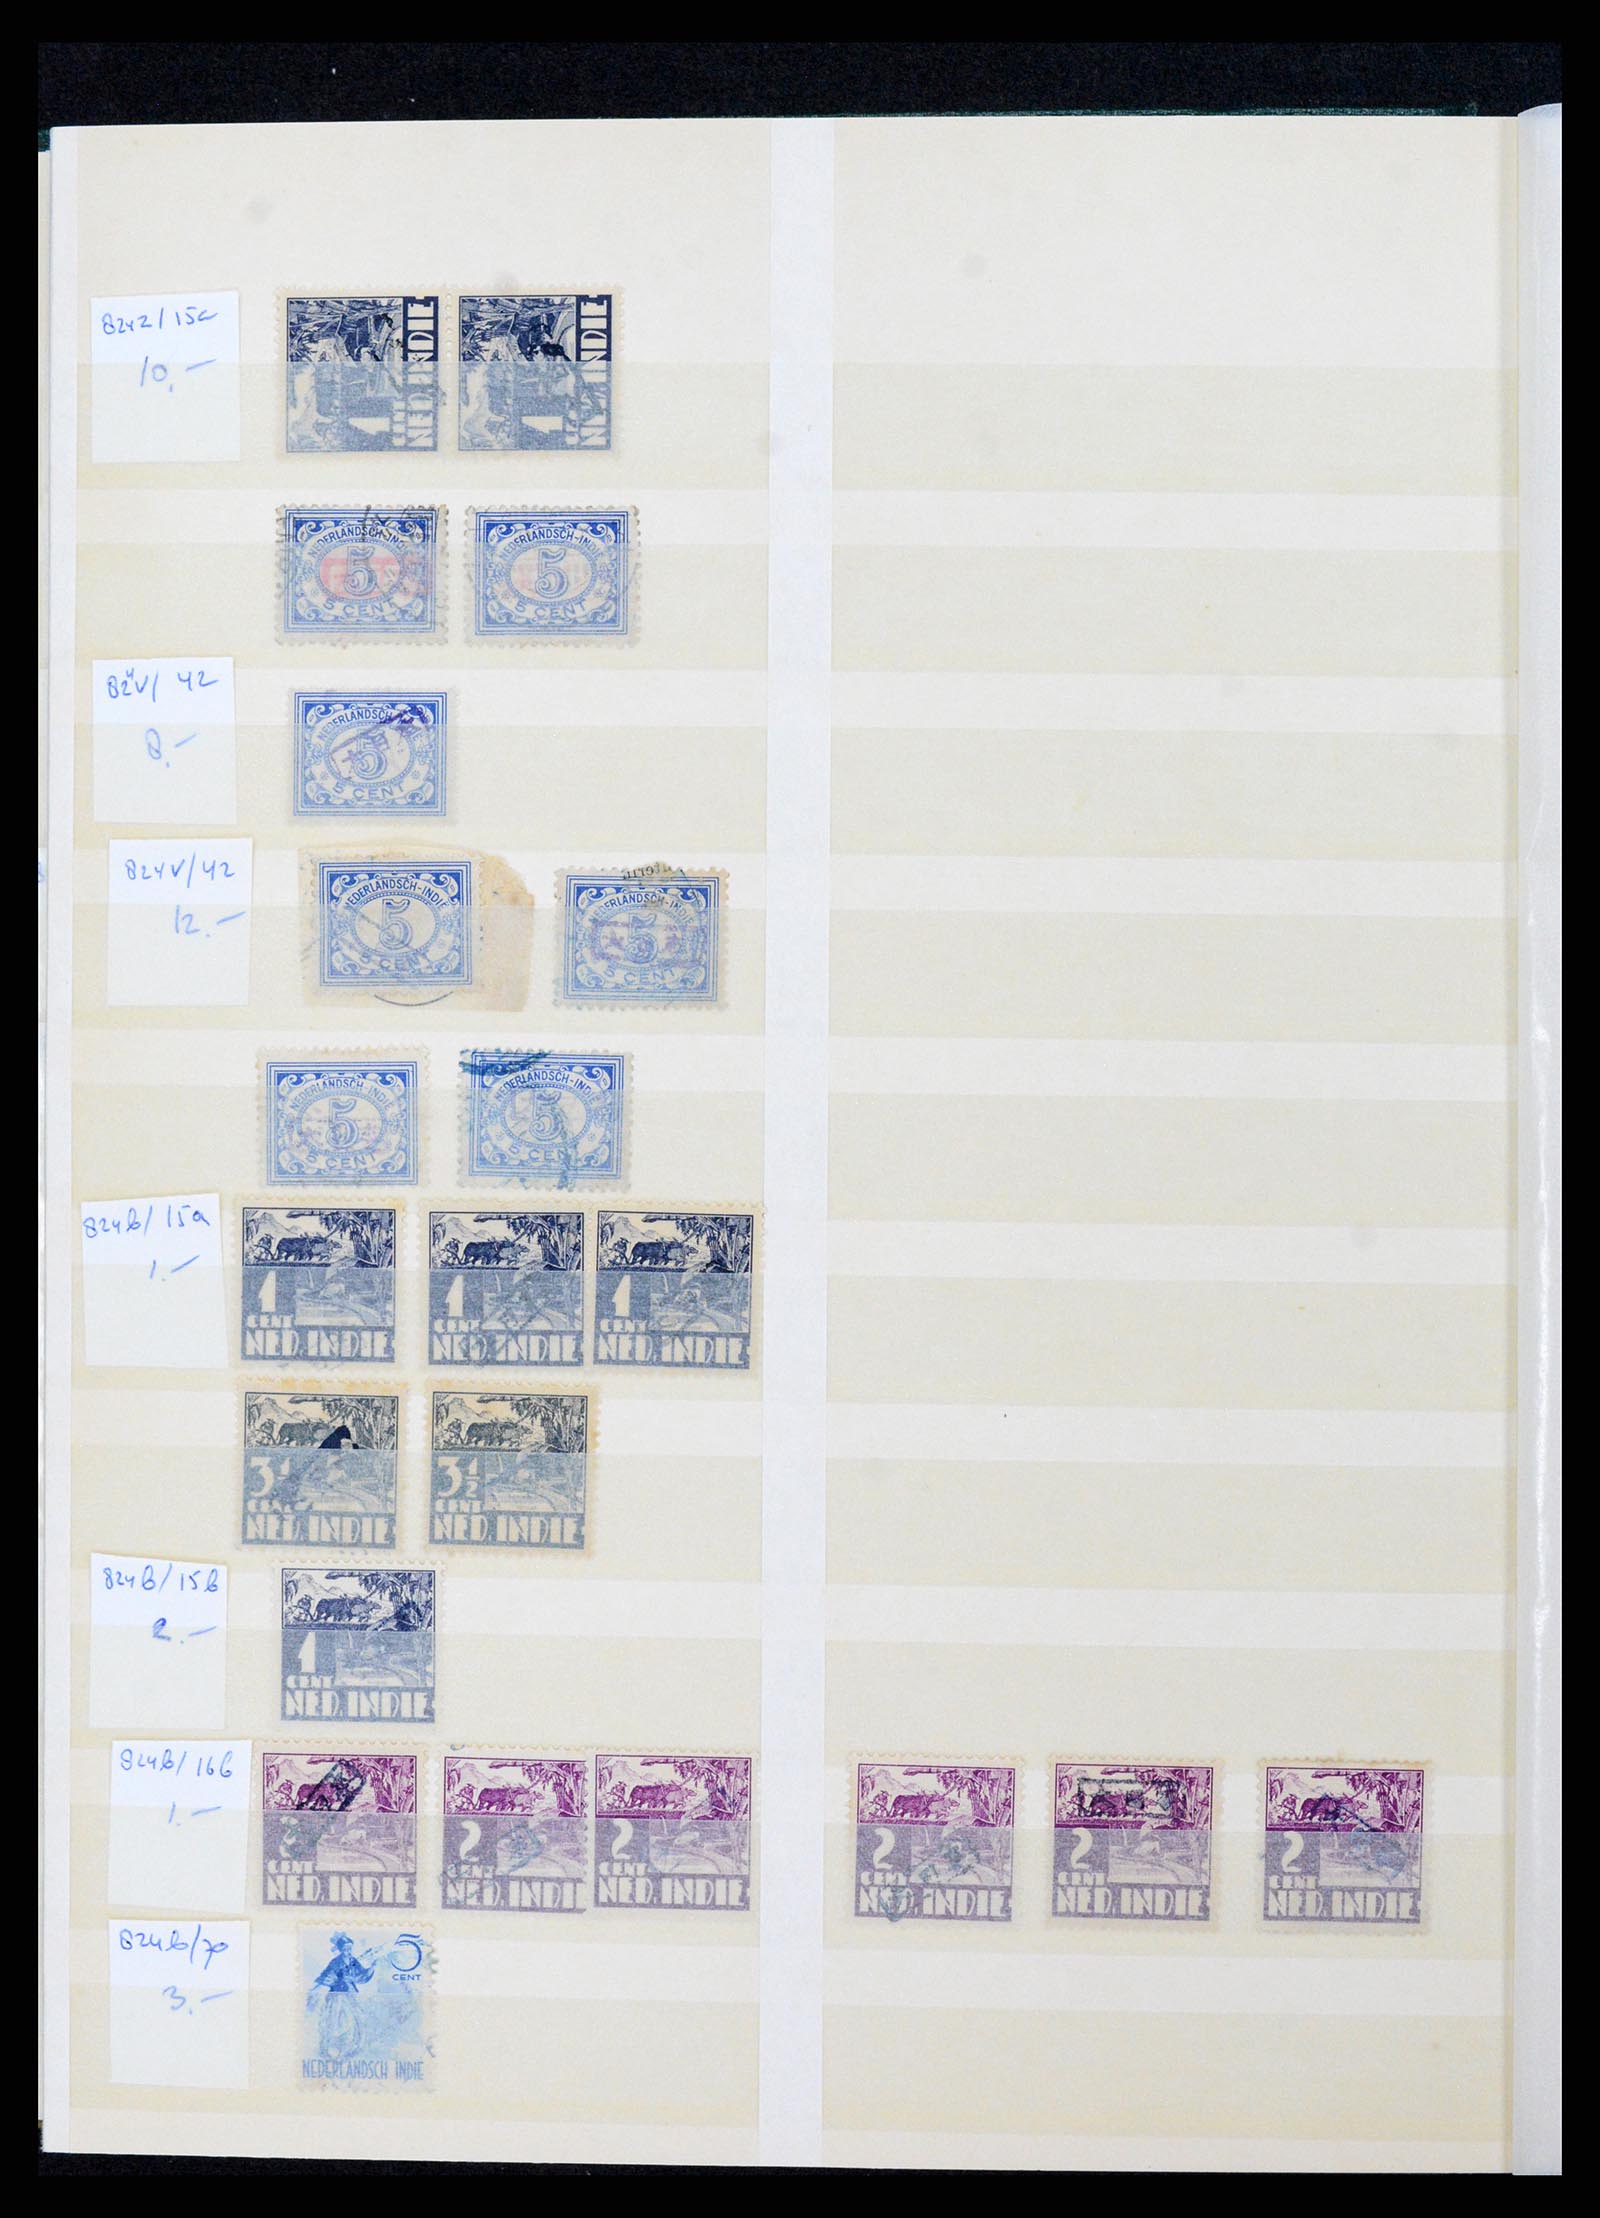 37429 010 - Stamp collection 37429 Japanese occupation Dutch East Indies 1942-1945.